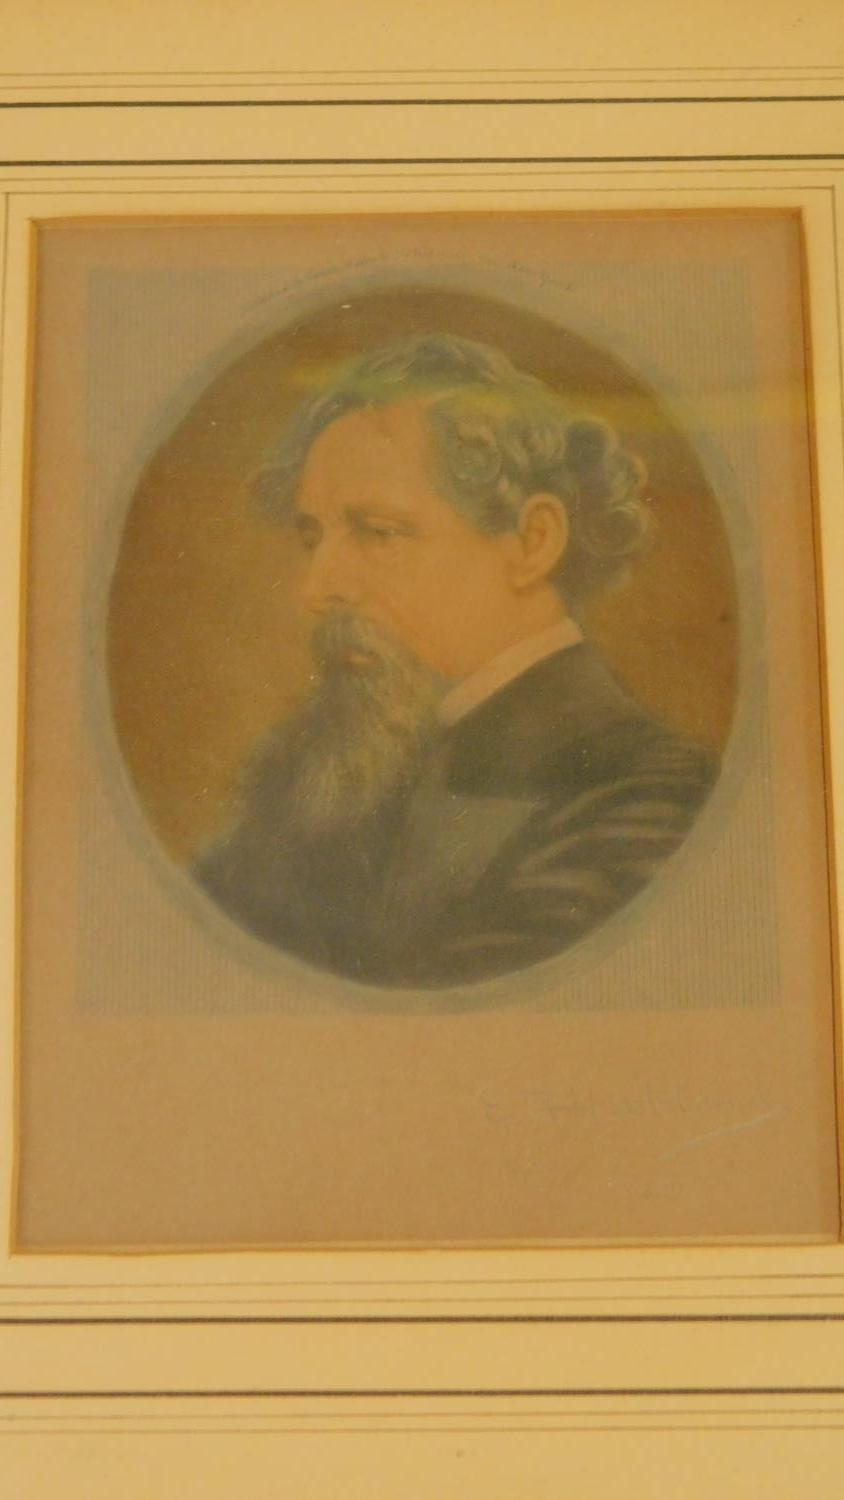 Two signed prints by E. F. Hubbard, one of Charles Dickens the other of Alfred Tennyson. 31x24cm - Image 4 of 8